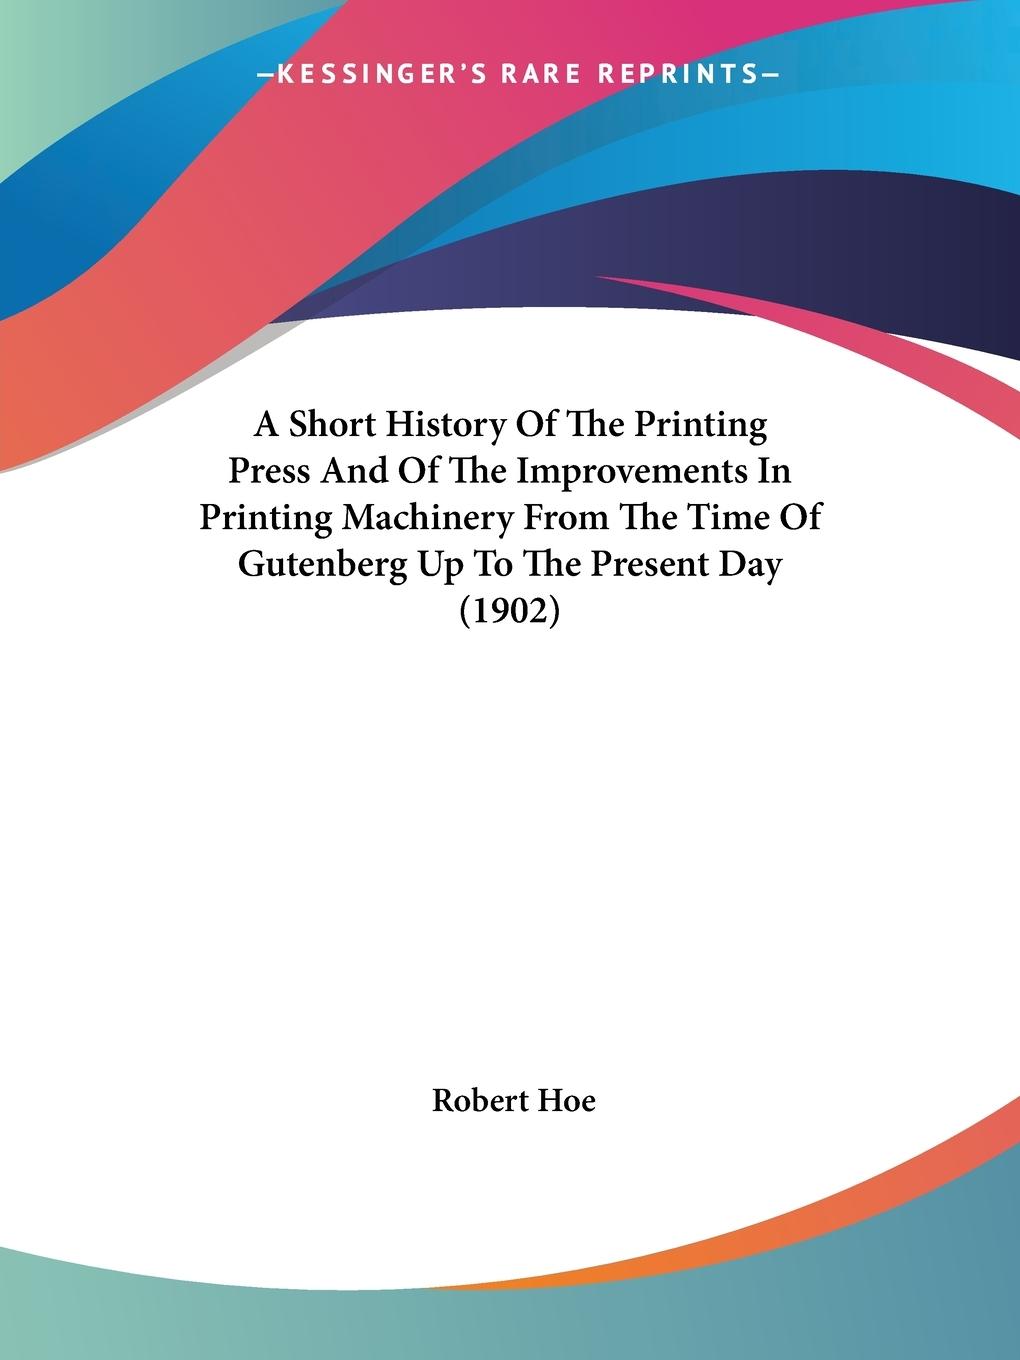 A Short History Of The Printing Press And Of The Improvements In Printing Machinery From The Time Of Gutenberg Up To The Present Day (1902) - Hoe, Robert